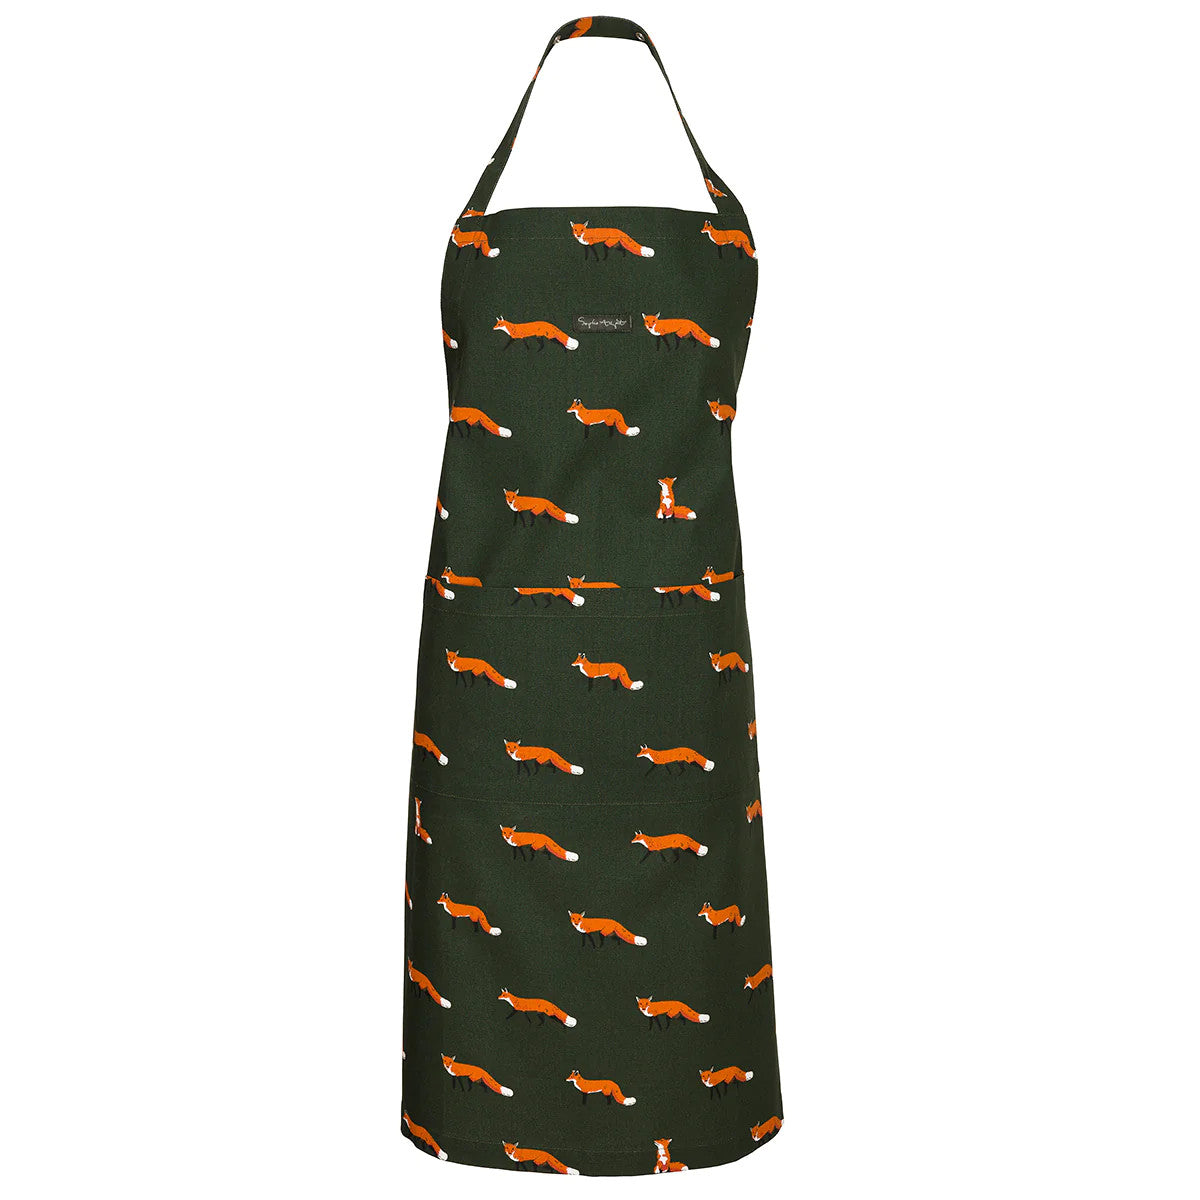 Foxes Apron by Sophie Allport.